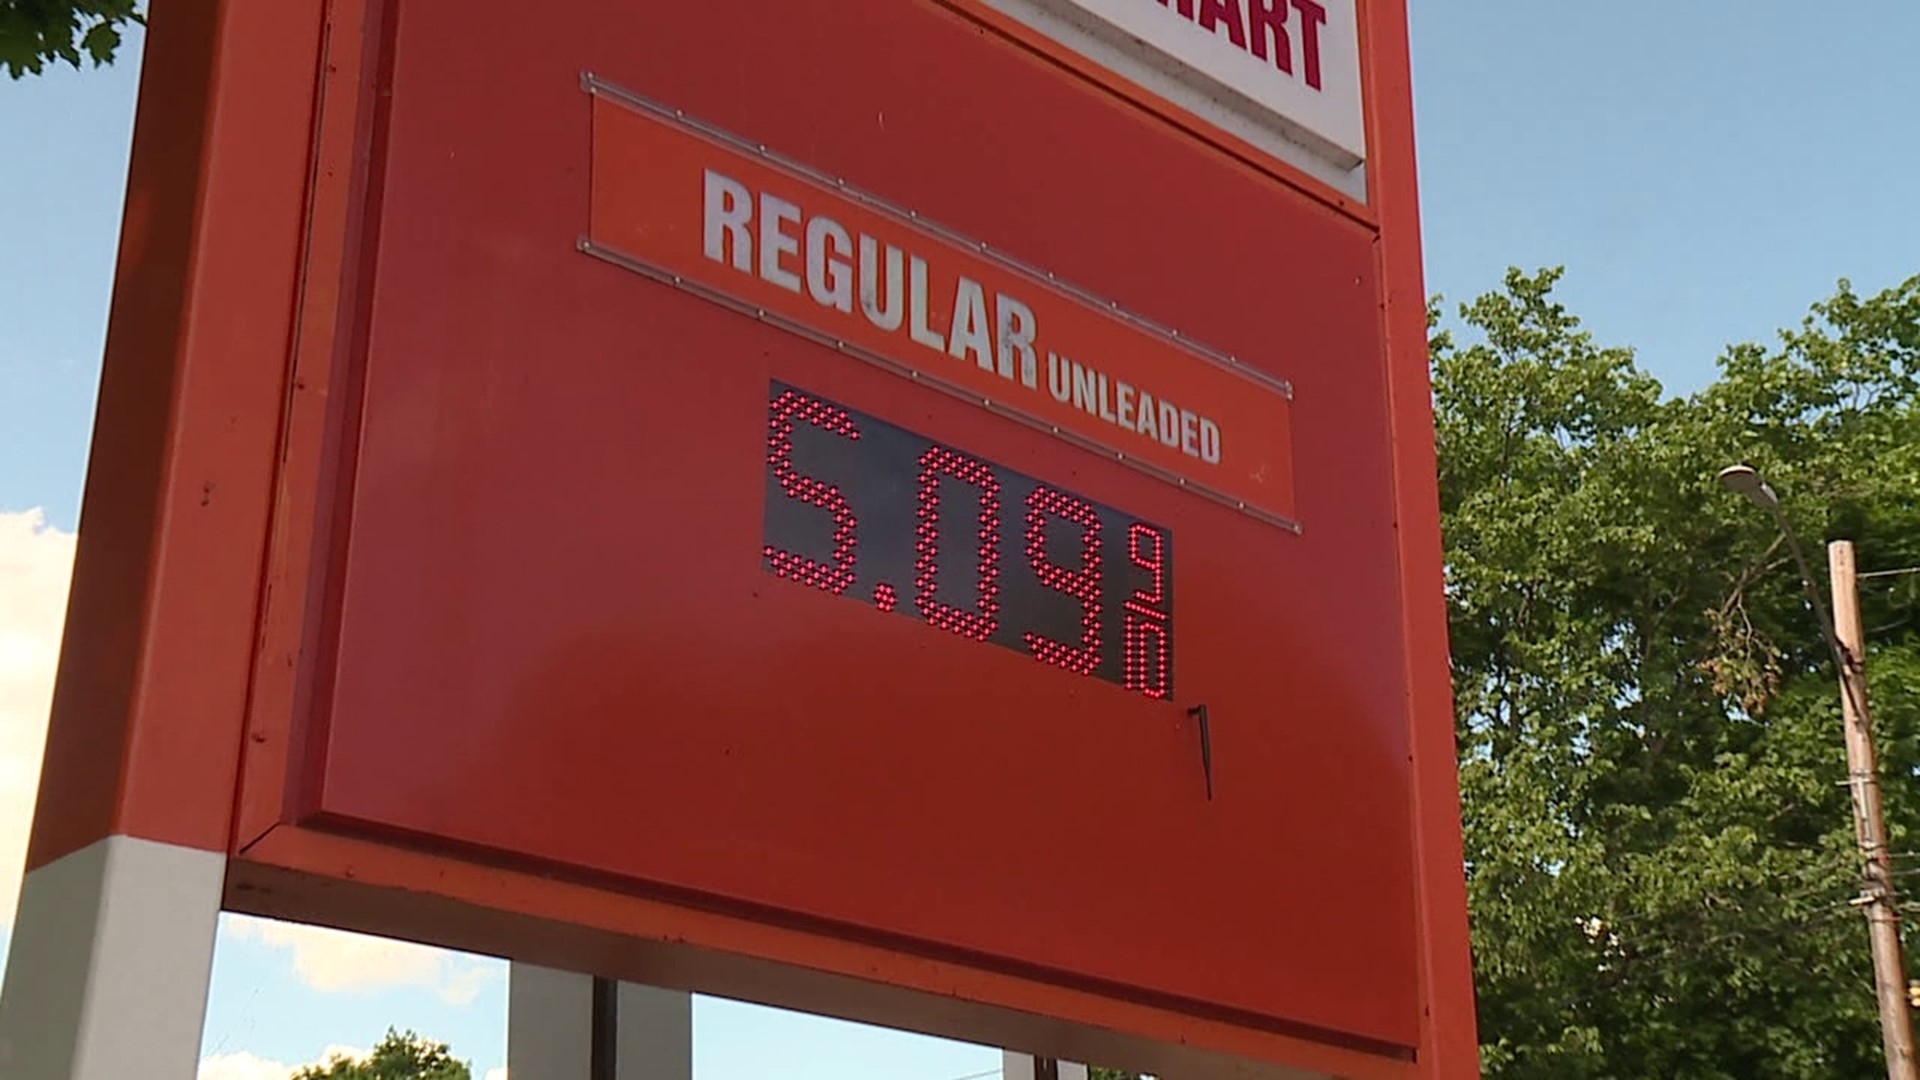 Another record-breaking day at the pumps has drivers not only frustrated but also scaling back on their time on the road.